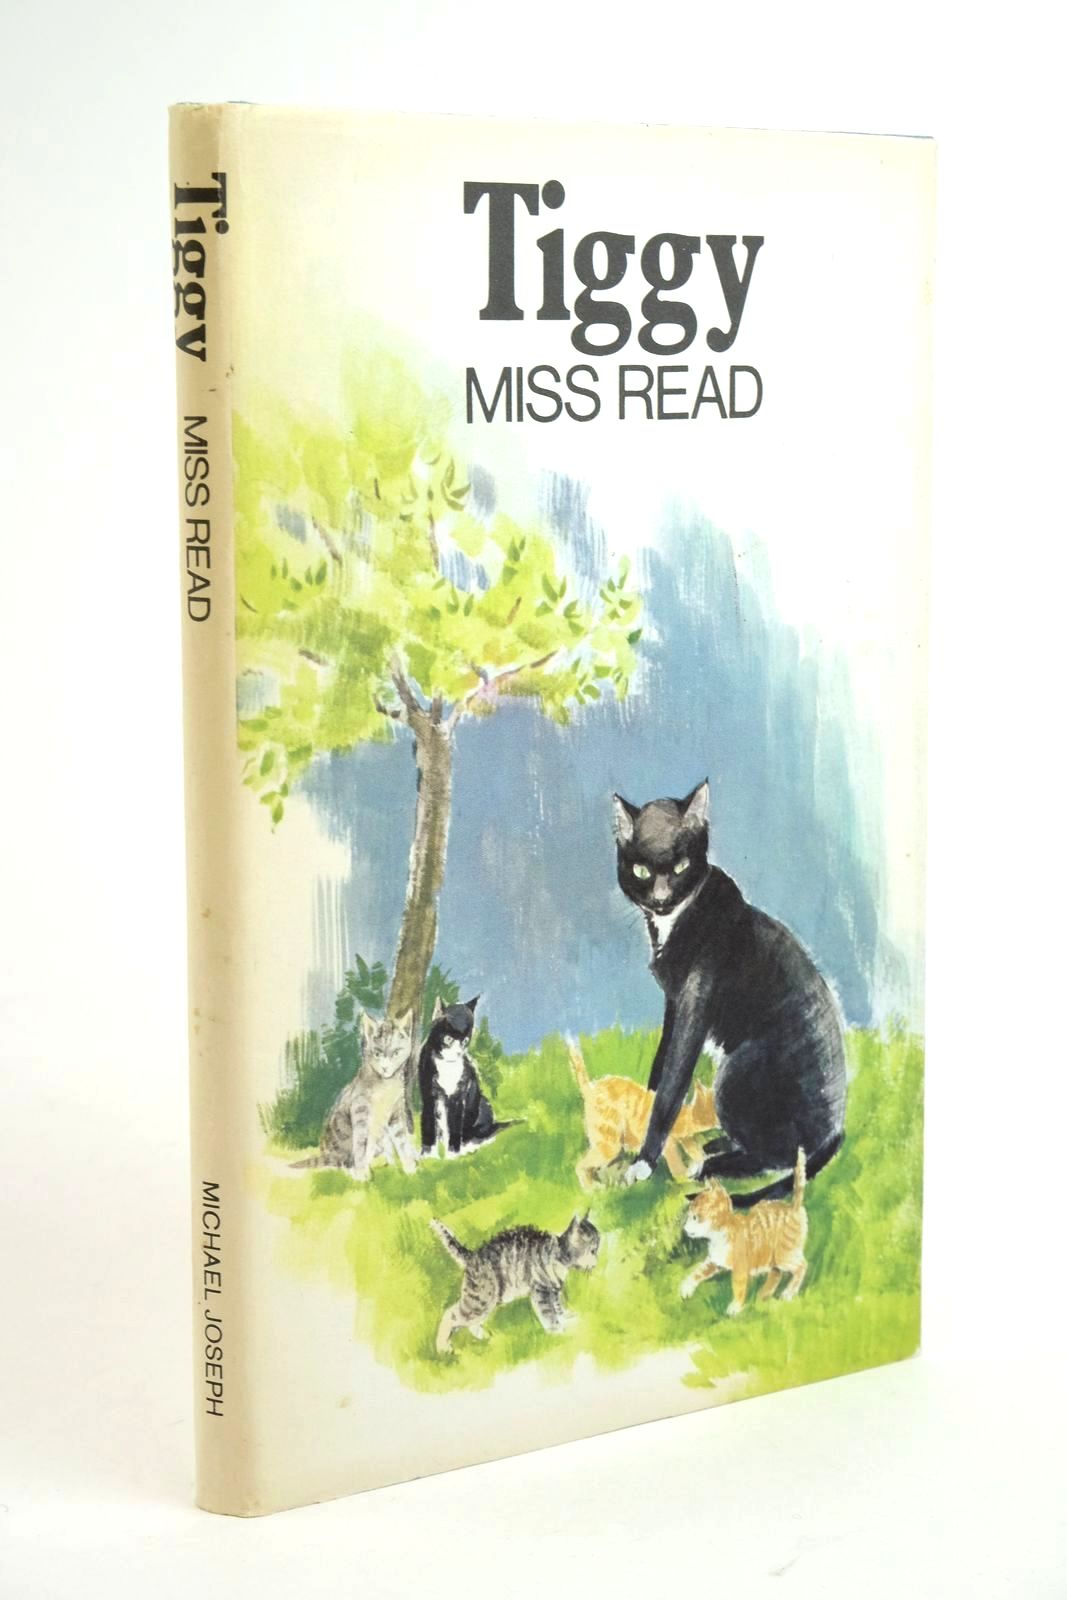 Photo of TIGGY written by Read, Miss illustrated by Dawson, Clare published by Michael Joseph (STOCK CODE: 1322147)  for sale by Stella & Rose's Books